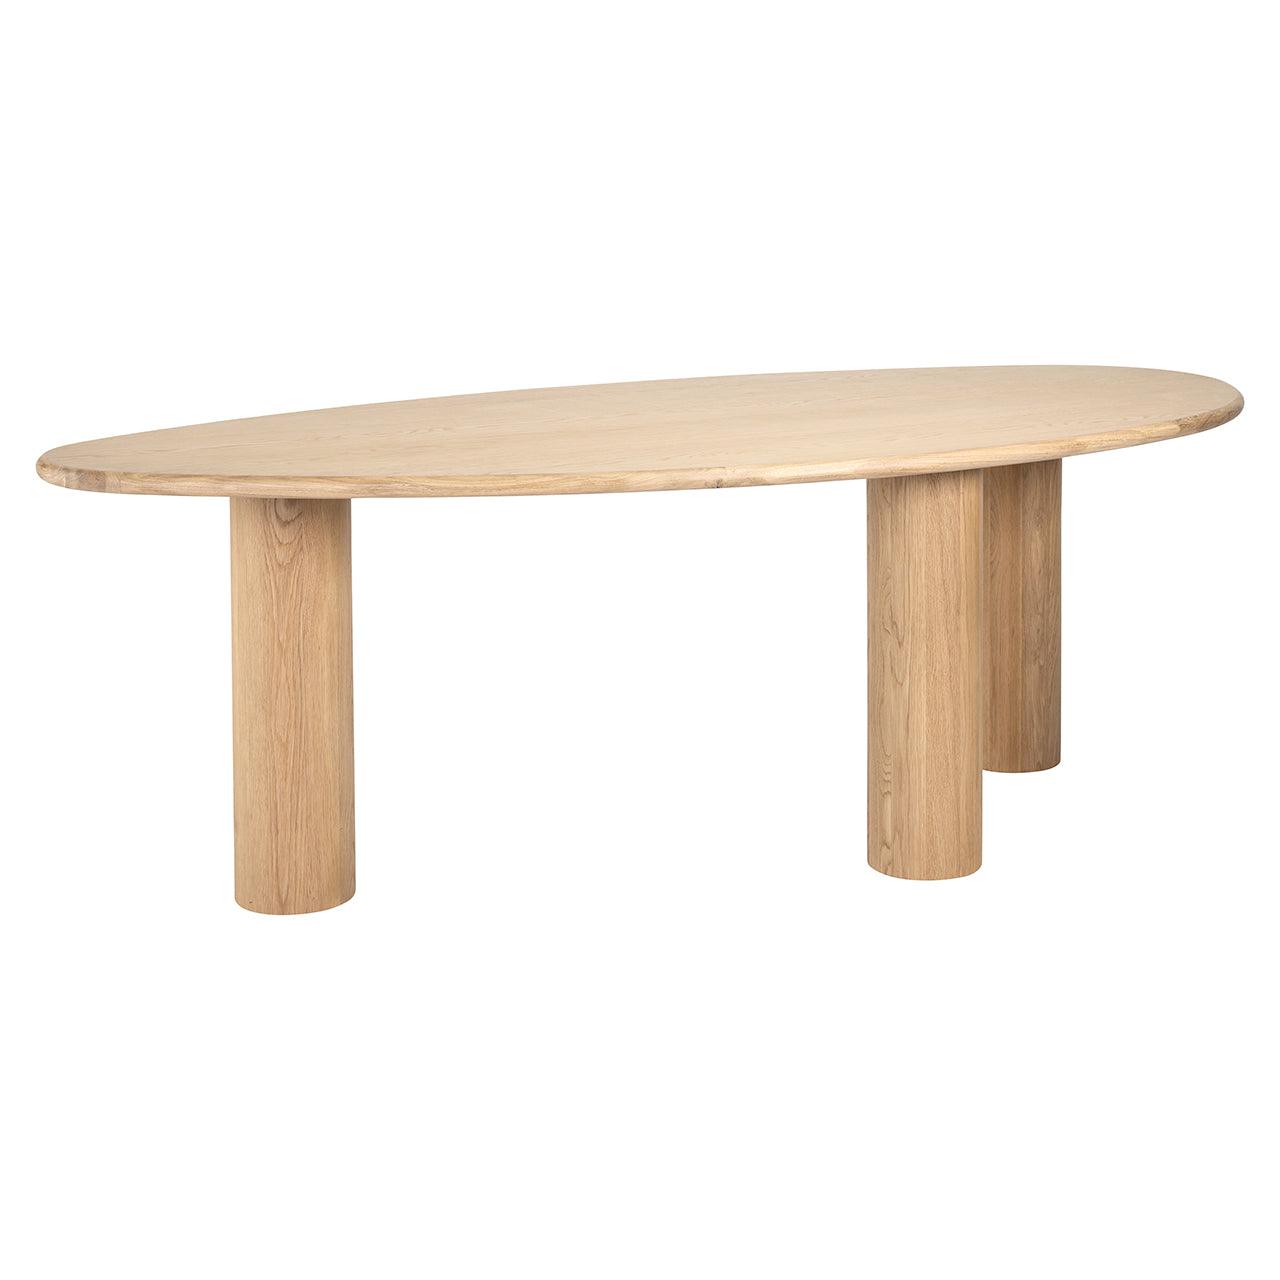 Oakley Natural Oak Wood Oval Dining Table by Richmond Interiors - Maison Rêves UK